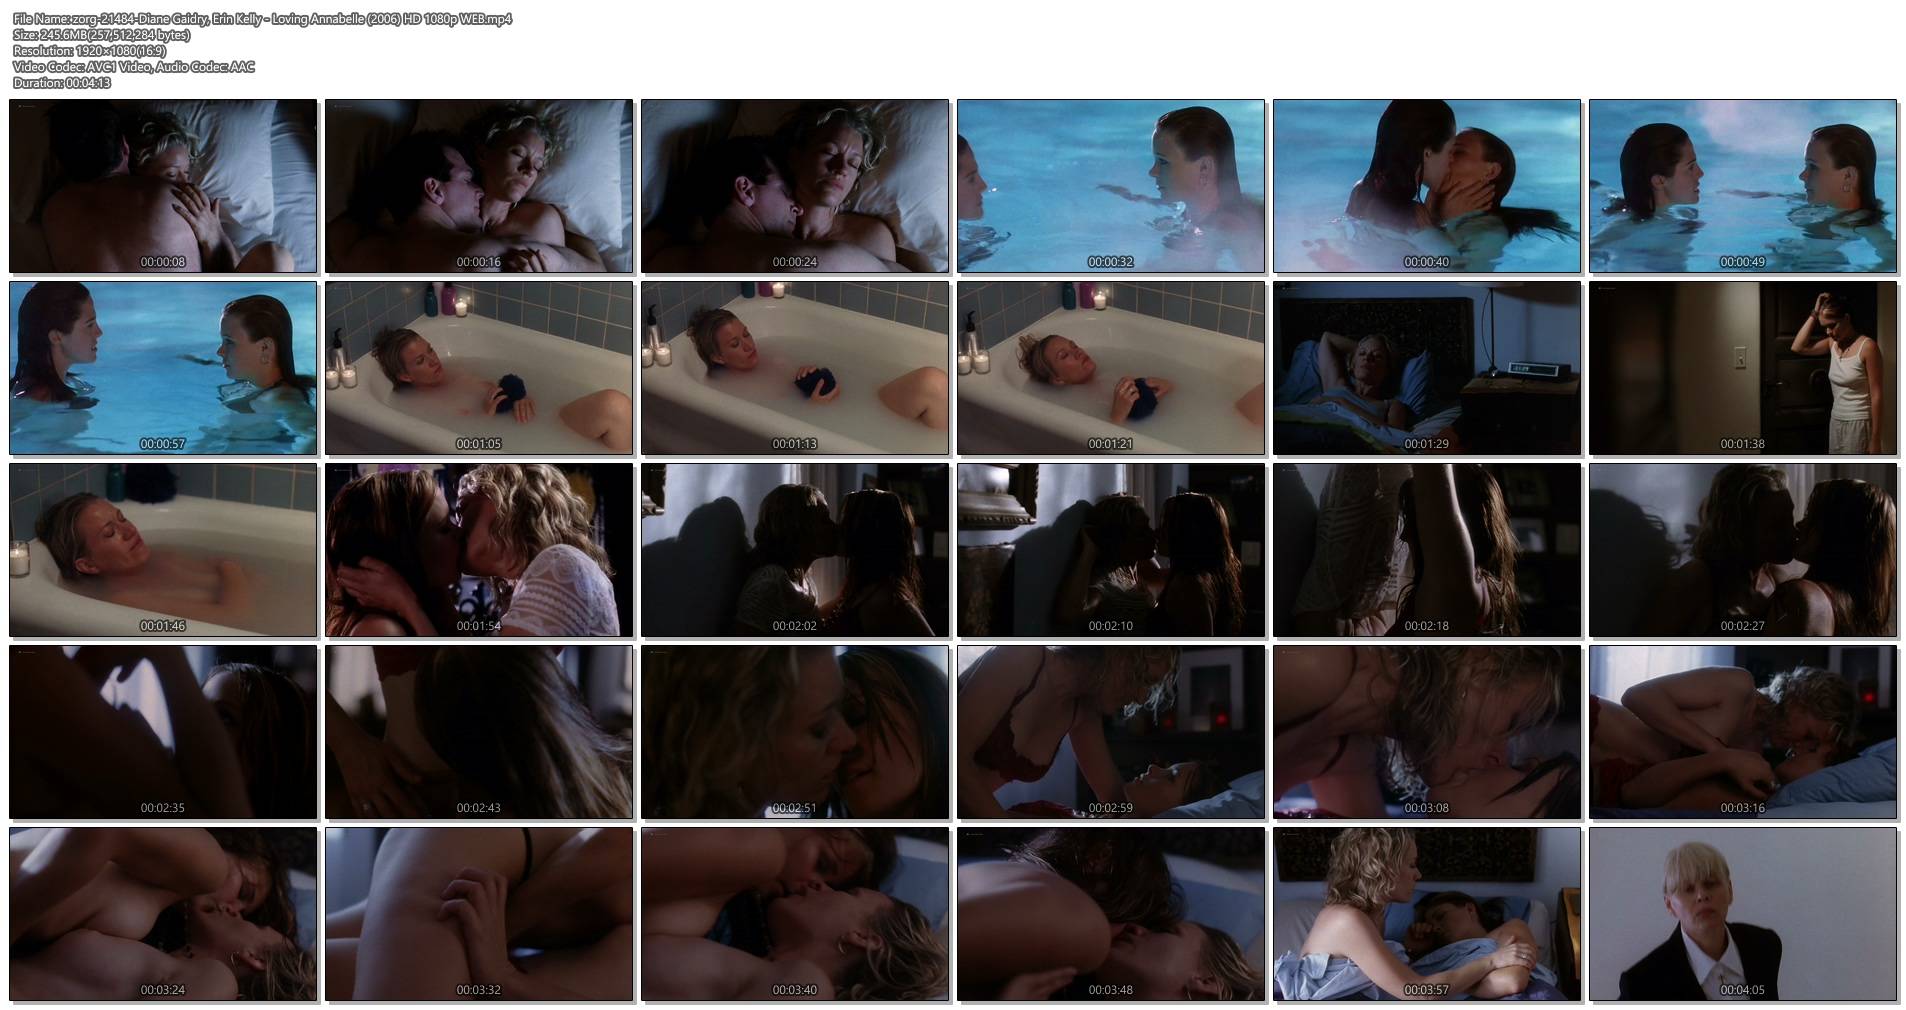 Diane Gaidry nude and lesbian sex with Erin Kelly - Loving Annabelle (2006) HD 1080p WEB (1)